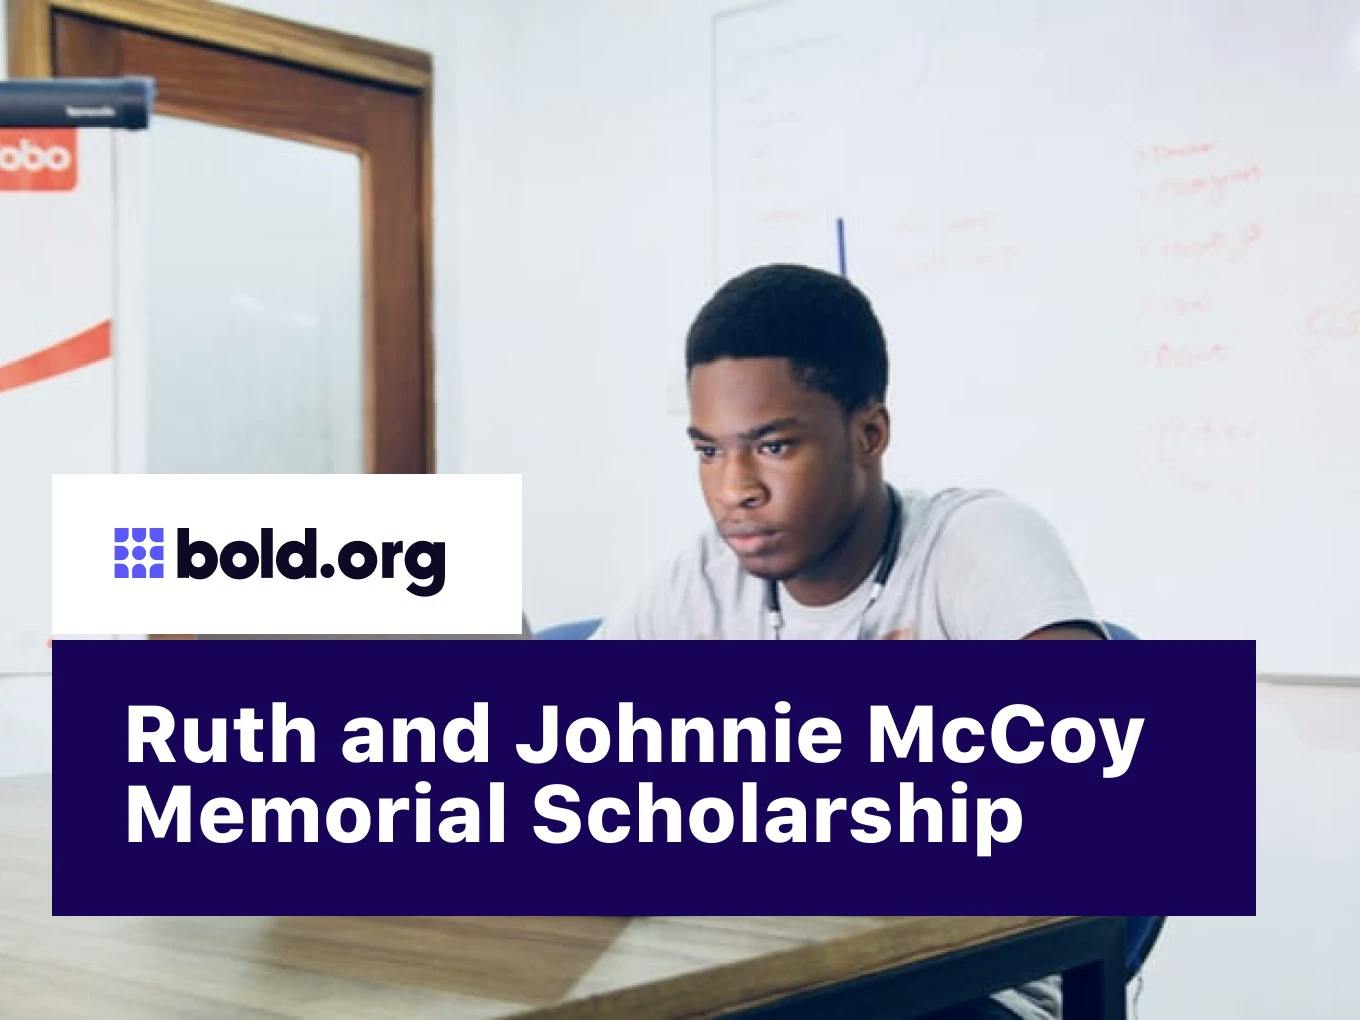 Ruth and Johnnie McCoy Memorial Scholarship